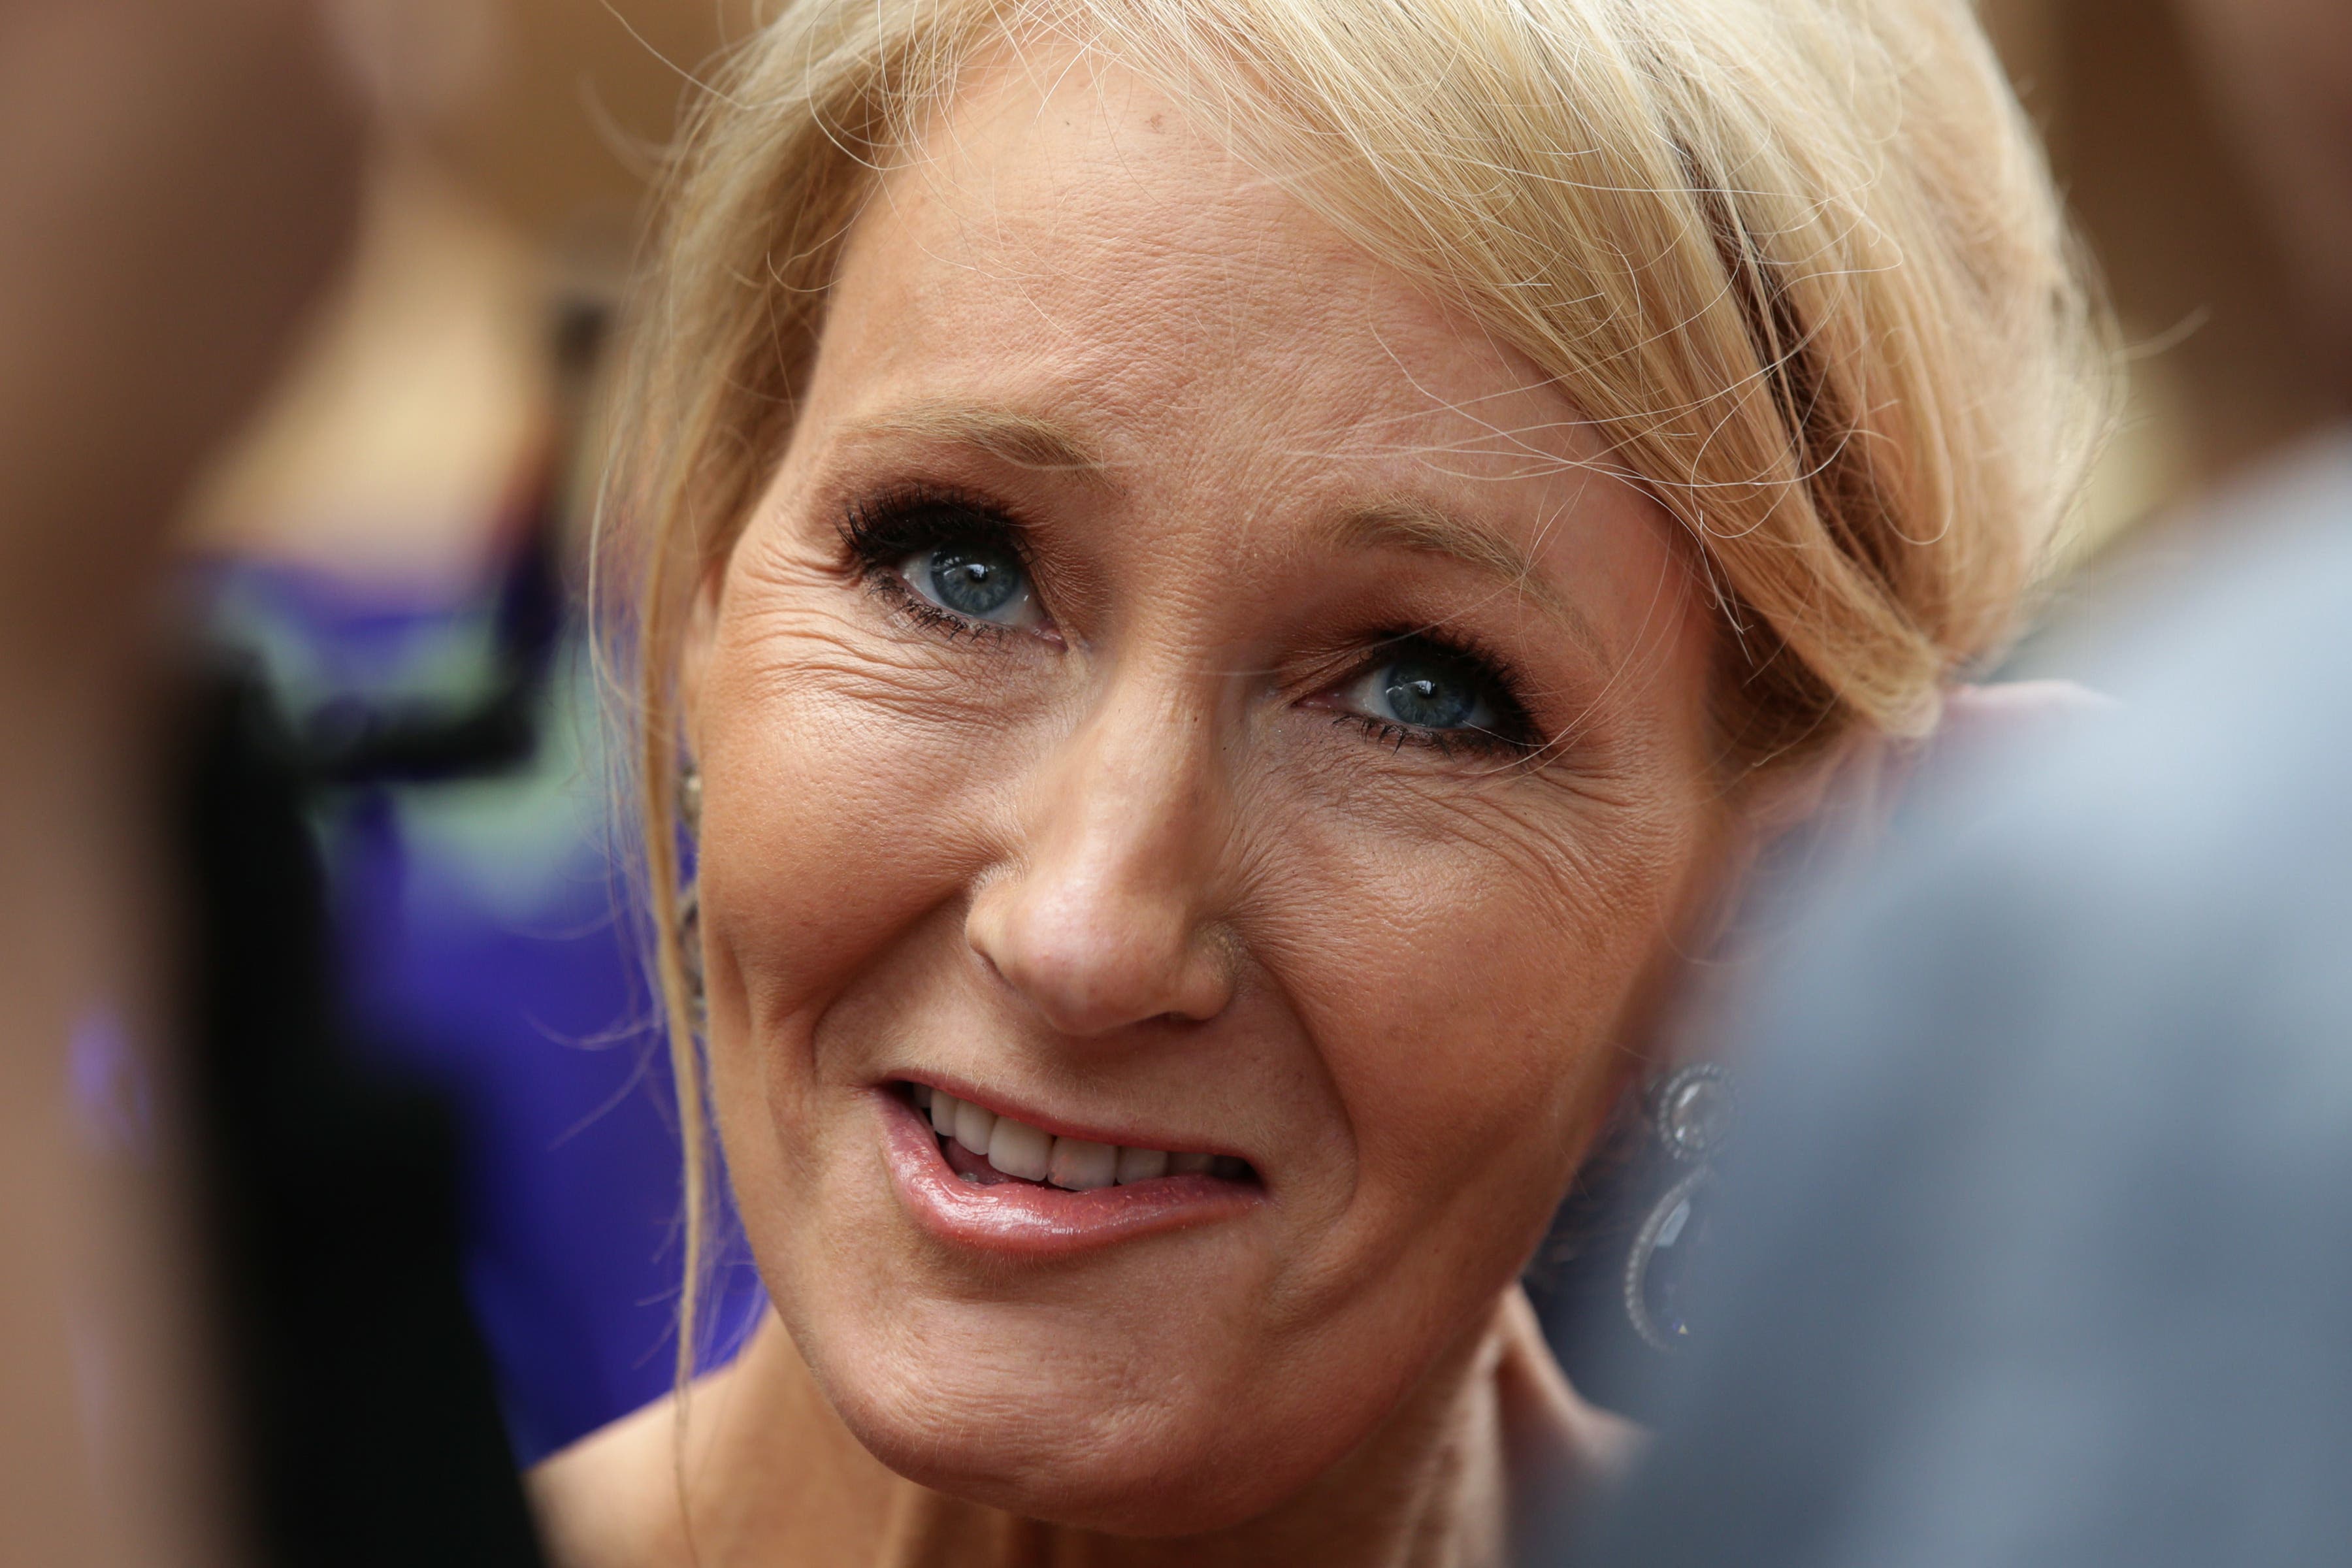 JK Rowling criticised Lisa Nandy for her support of transgender rights (Yui Mok/PA)